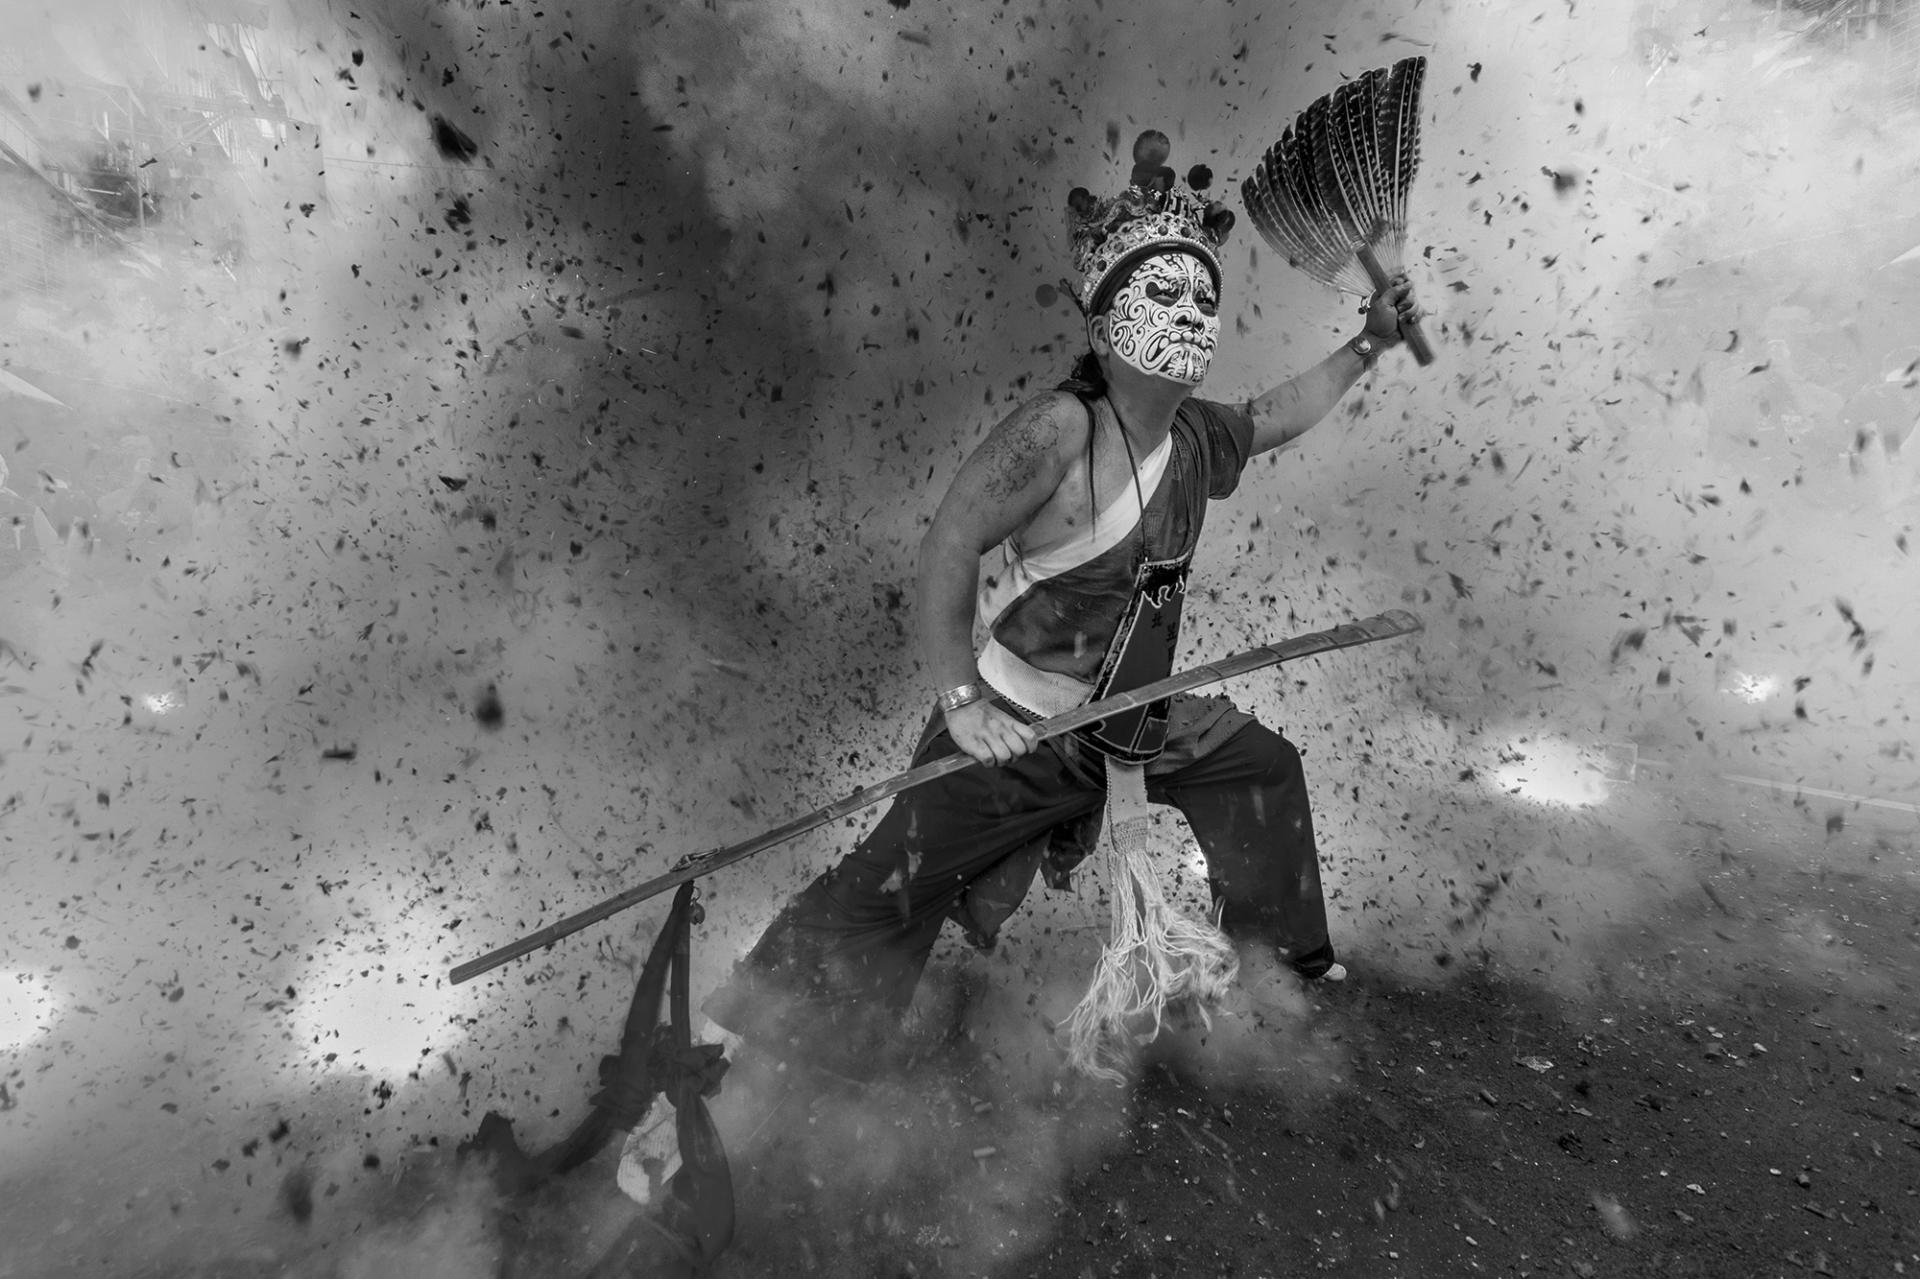 New York Photography Awards Winner - Sacred and Fearless